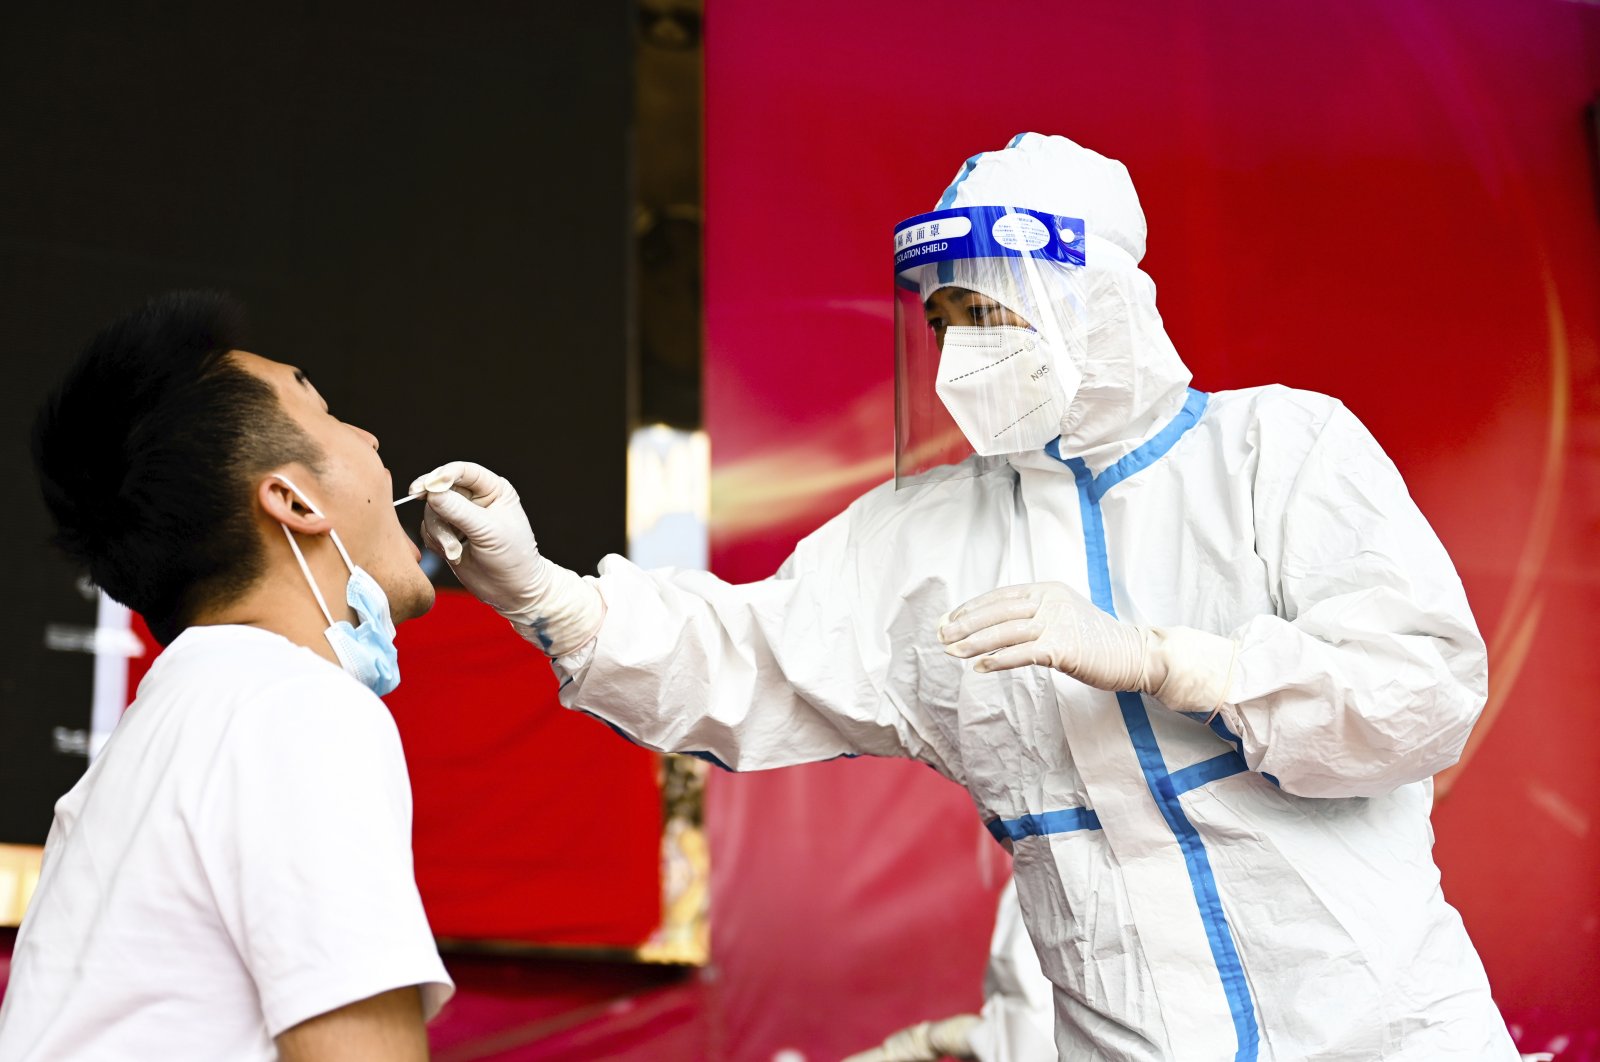 In this photo released by Xinhua News Agency, a medical worker collects a swab sample for a nucleic acid test in Ruili City of southwest China's Yunnan Province, on July 5, 2021. (AP Photo)